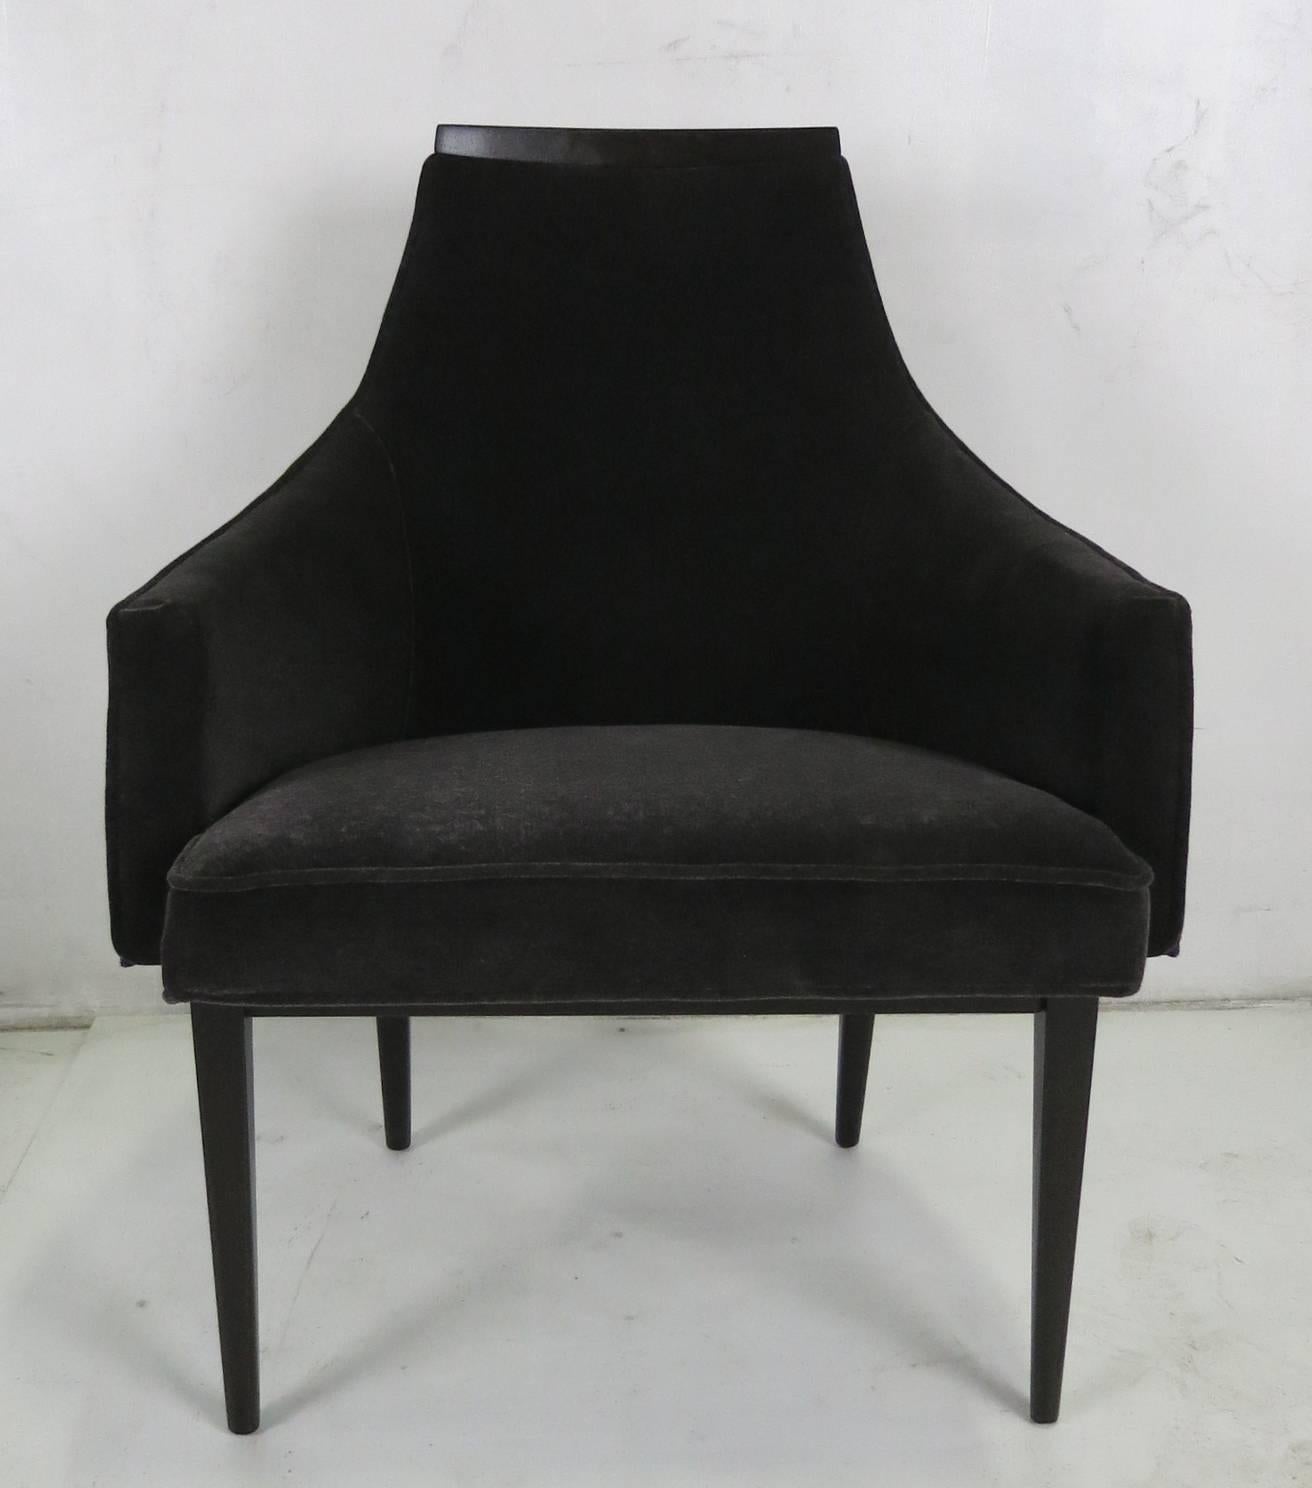 Handsome occasional chair with mahogany frame meticulously refinished in dark brown lacquer and upholstered in luxurious charcoal grey velvet.  All work done with painstaking quality at our in-house workroom.  